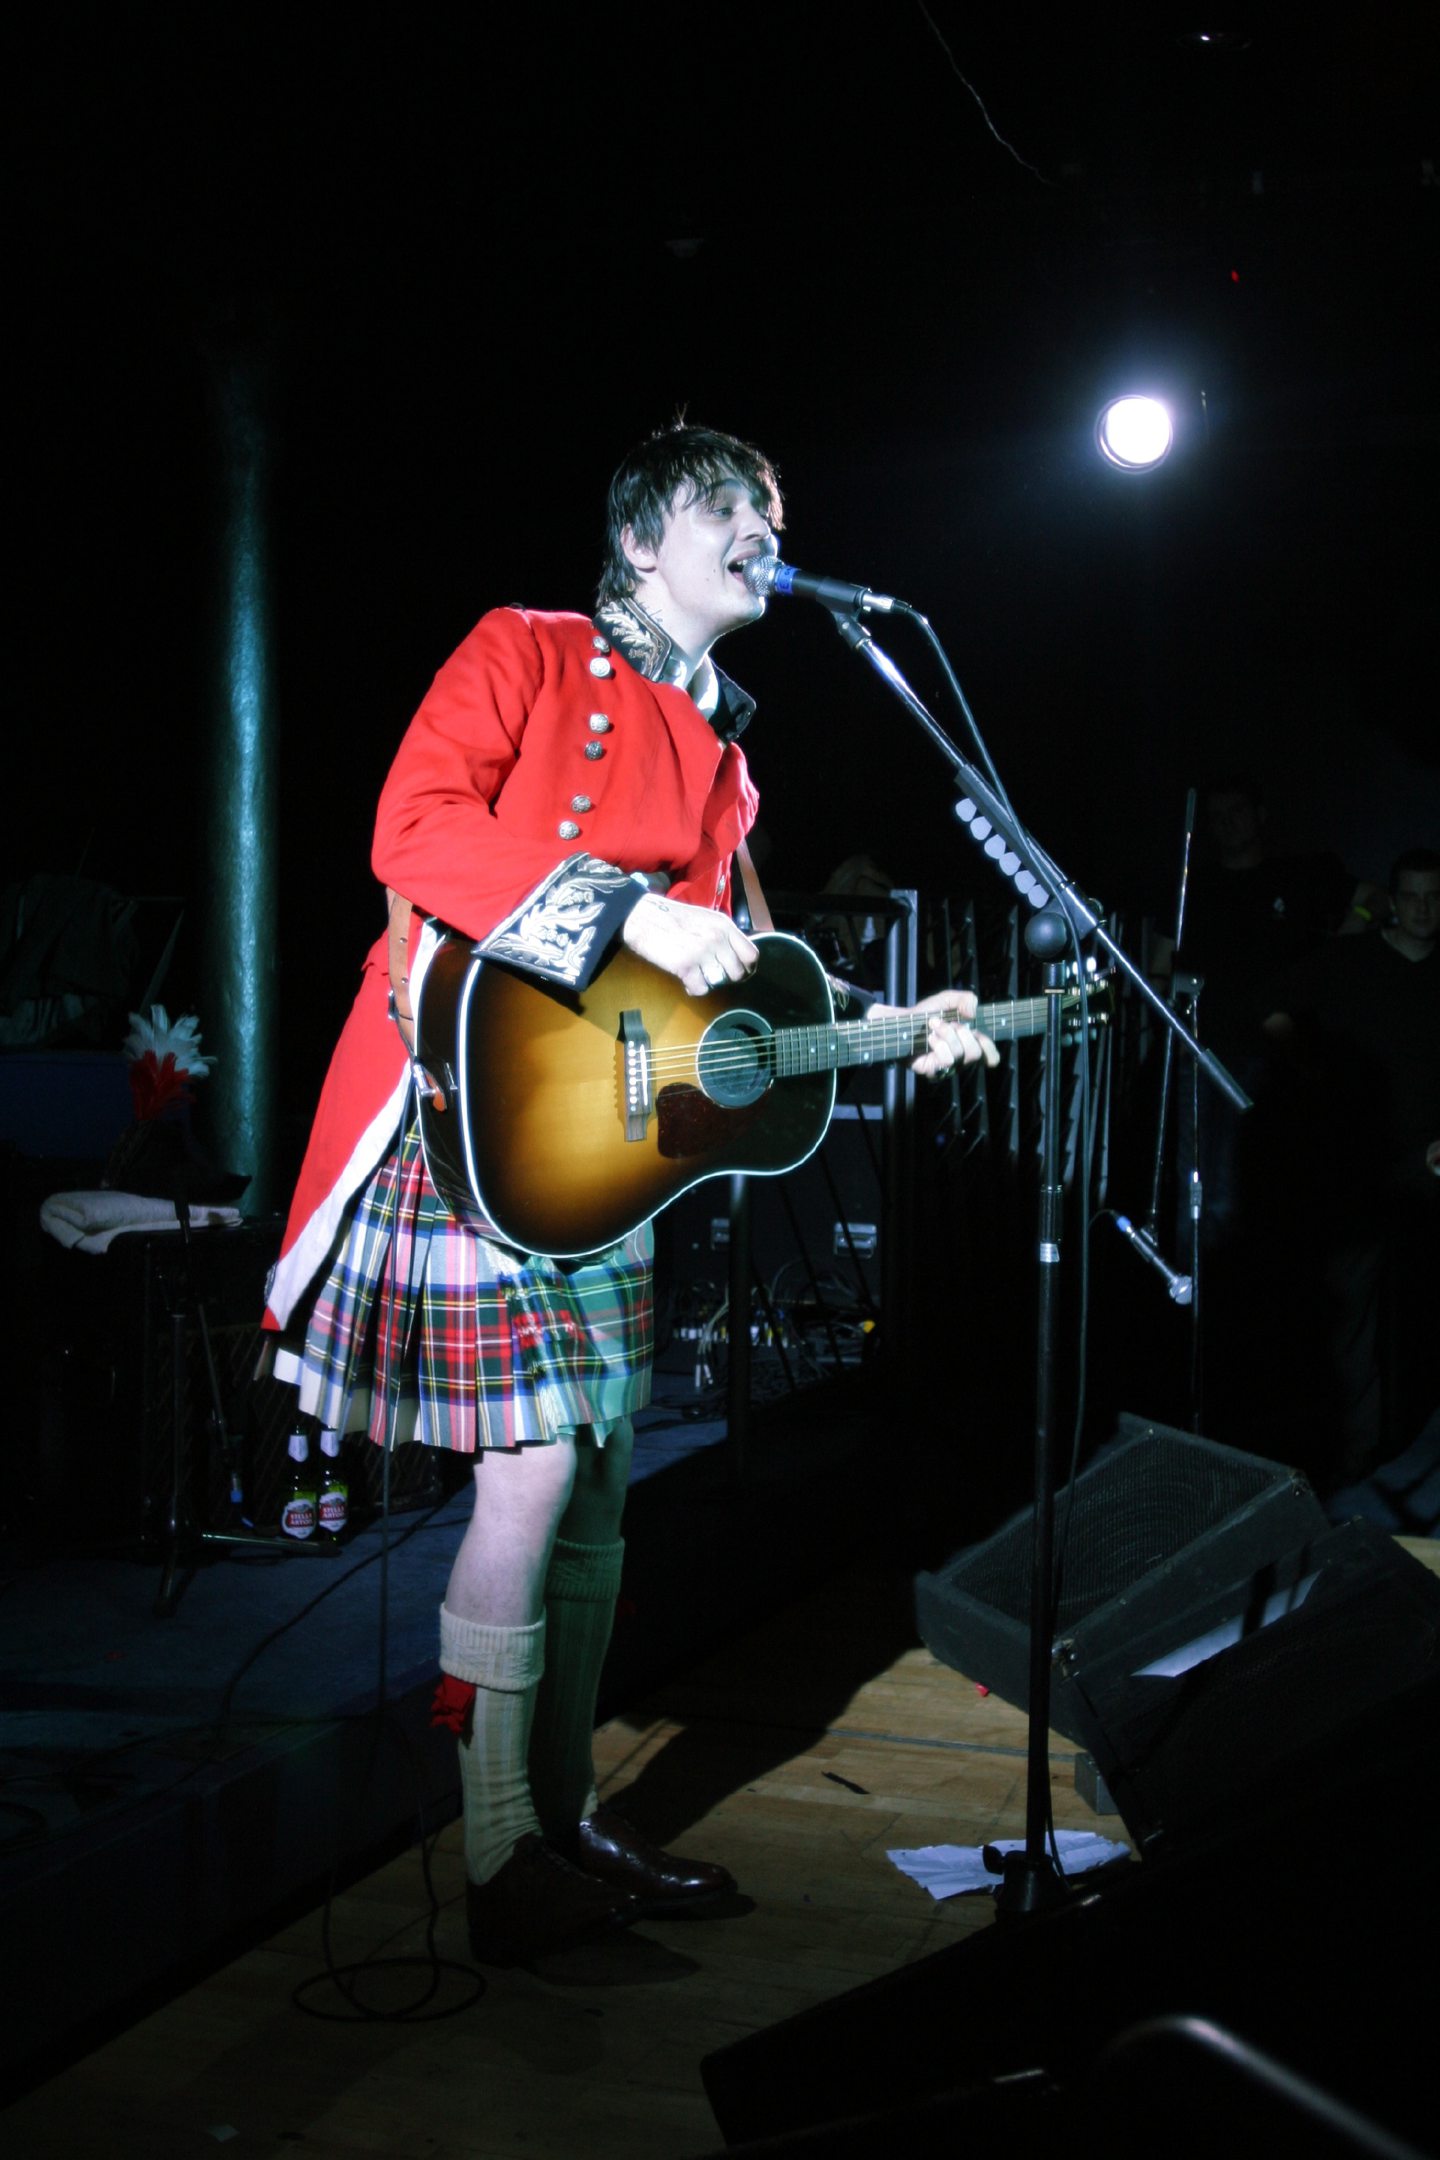 Pete Doherty on stage in a military jacket and kilt at Fat Sam's in 2009. Image: DC Thomson.